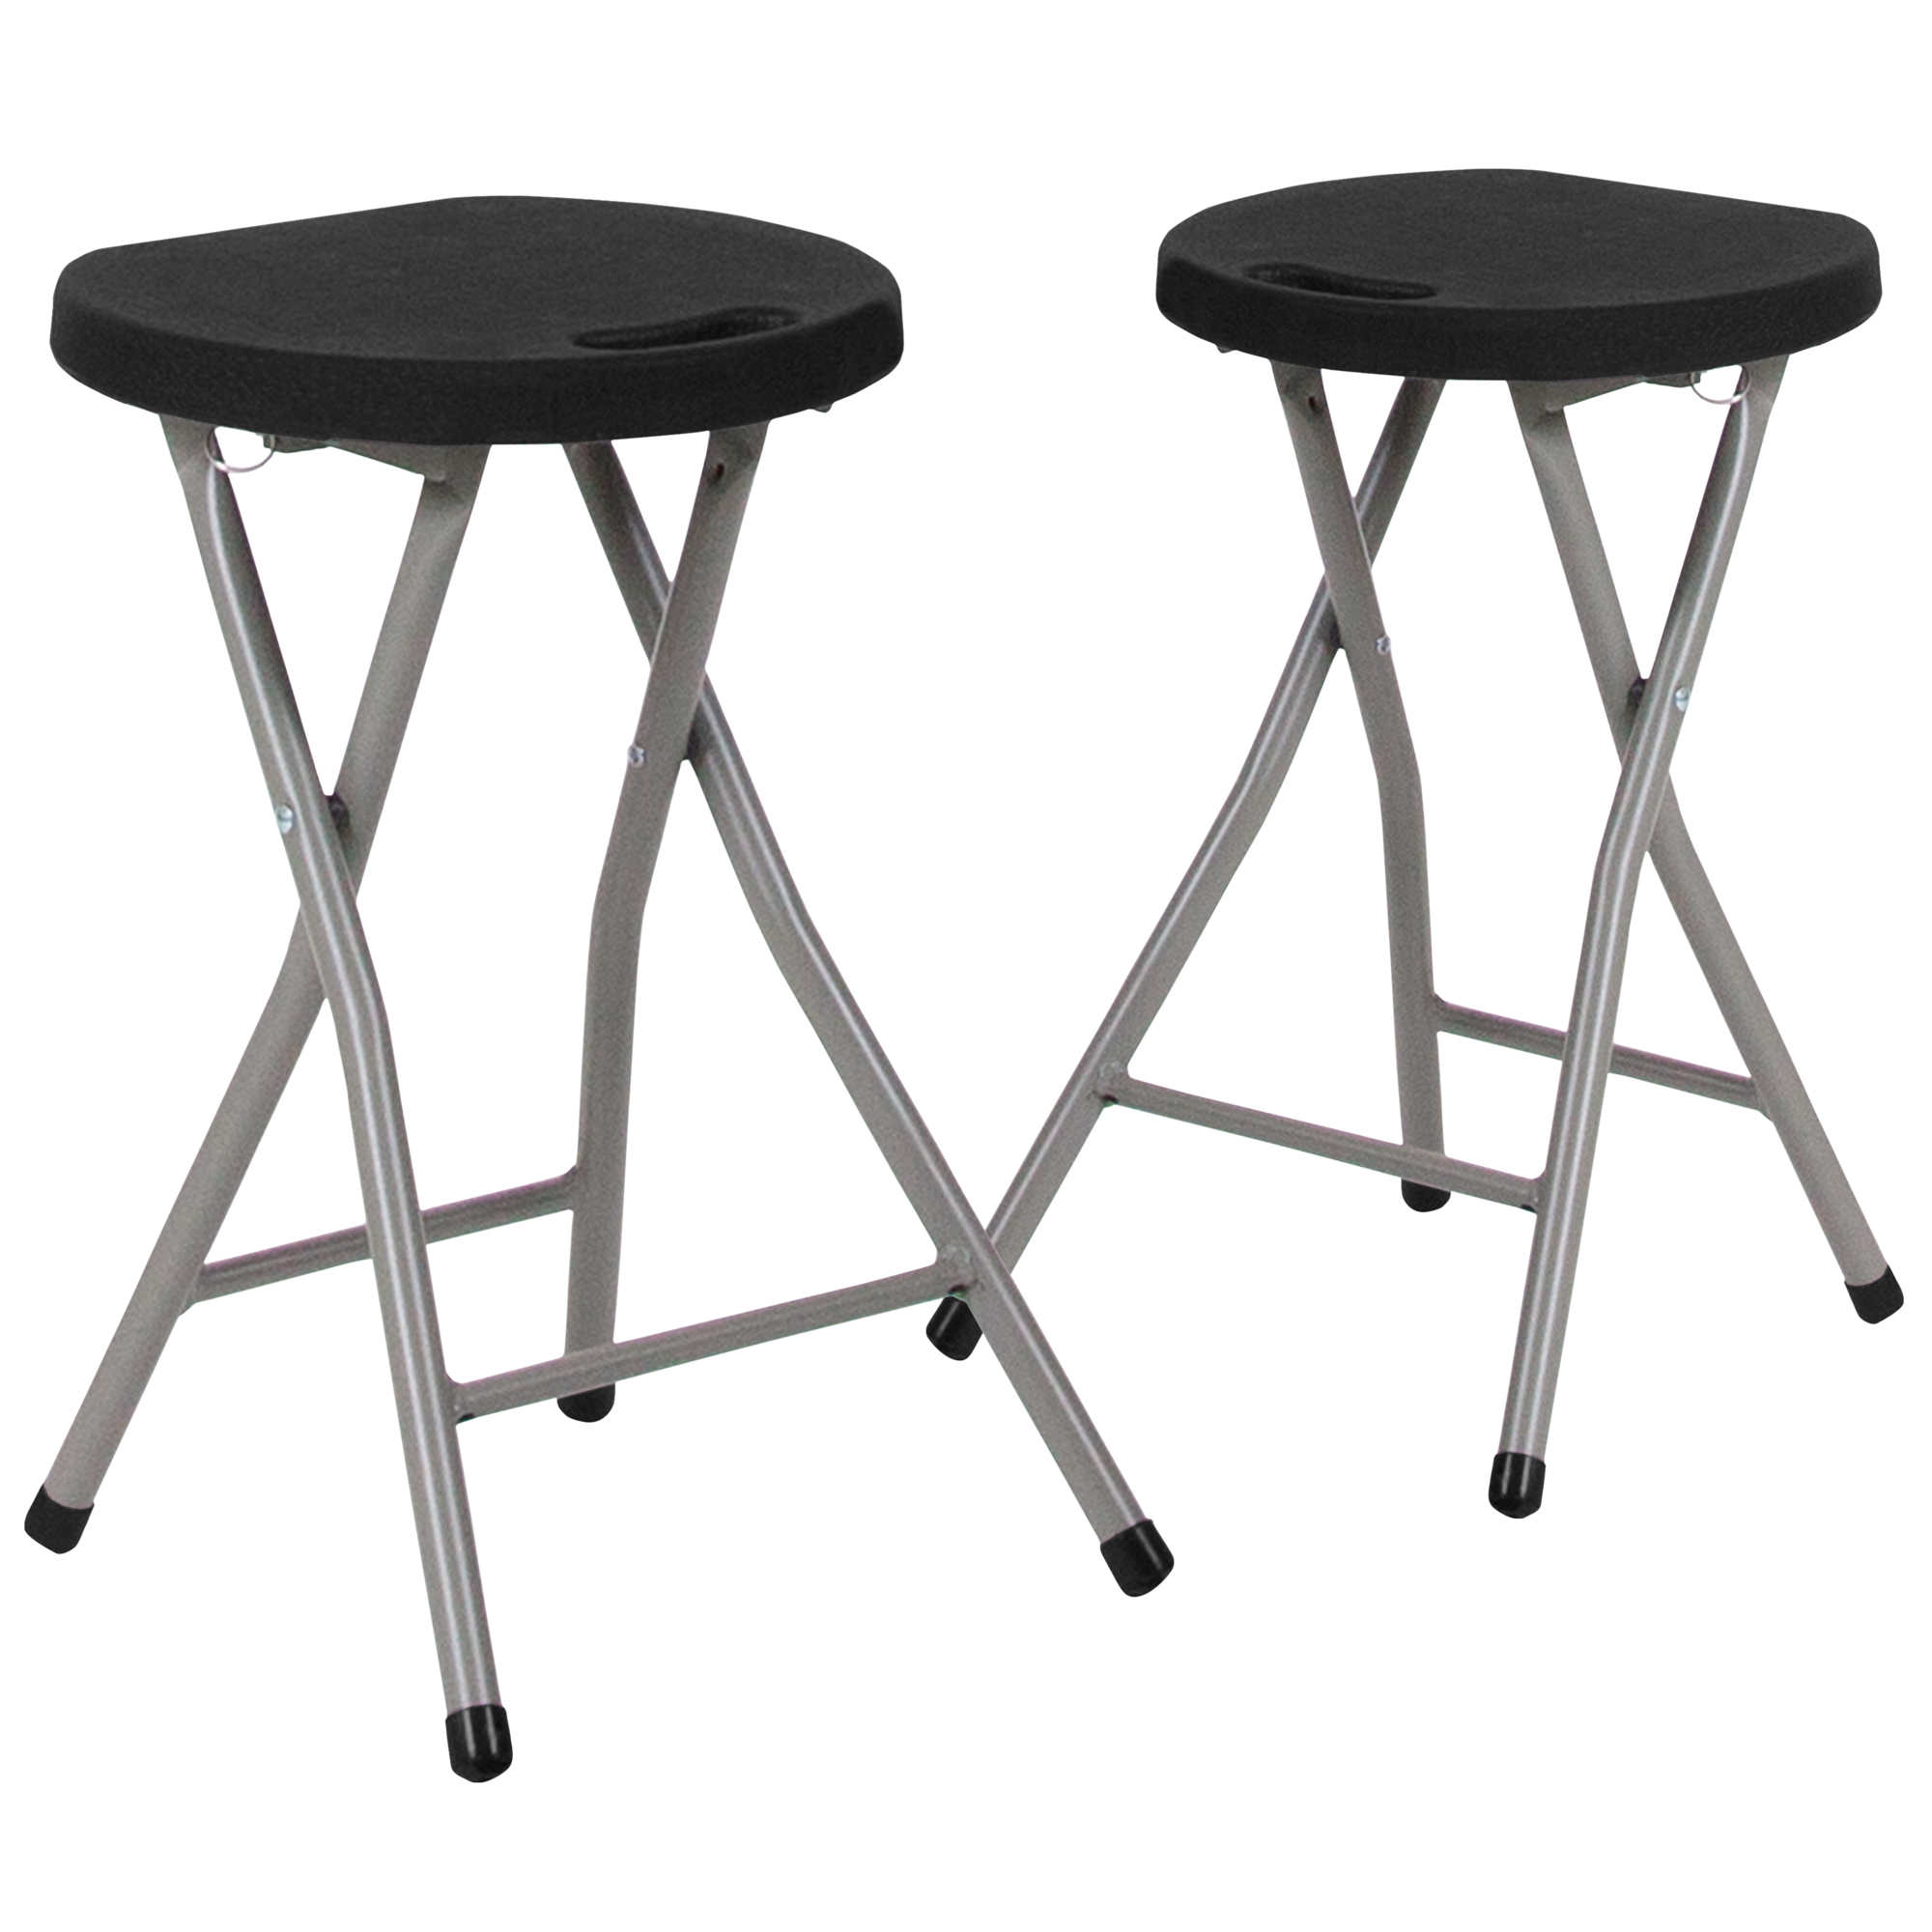 Flash Furniture, 2PK Foldable Stool w/ Black Plastic Seat-Portable, Primary Color Black, Included (qty.) 2, Model 2DADYCD30